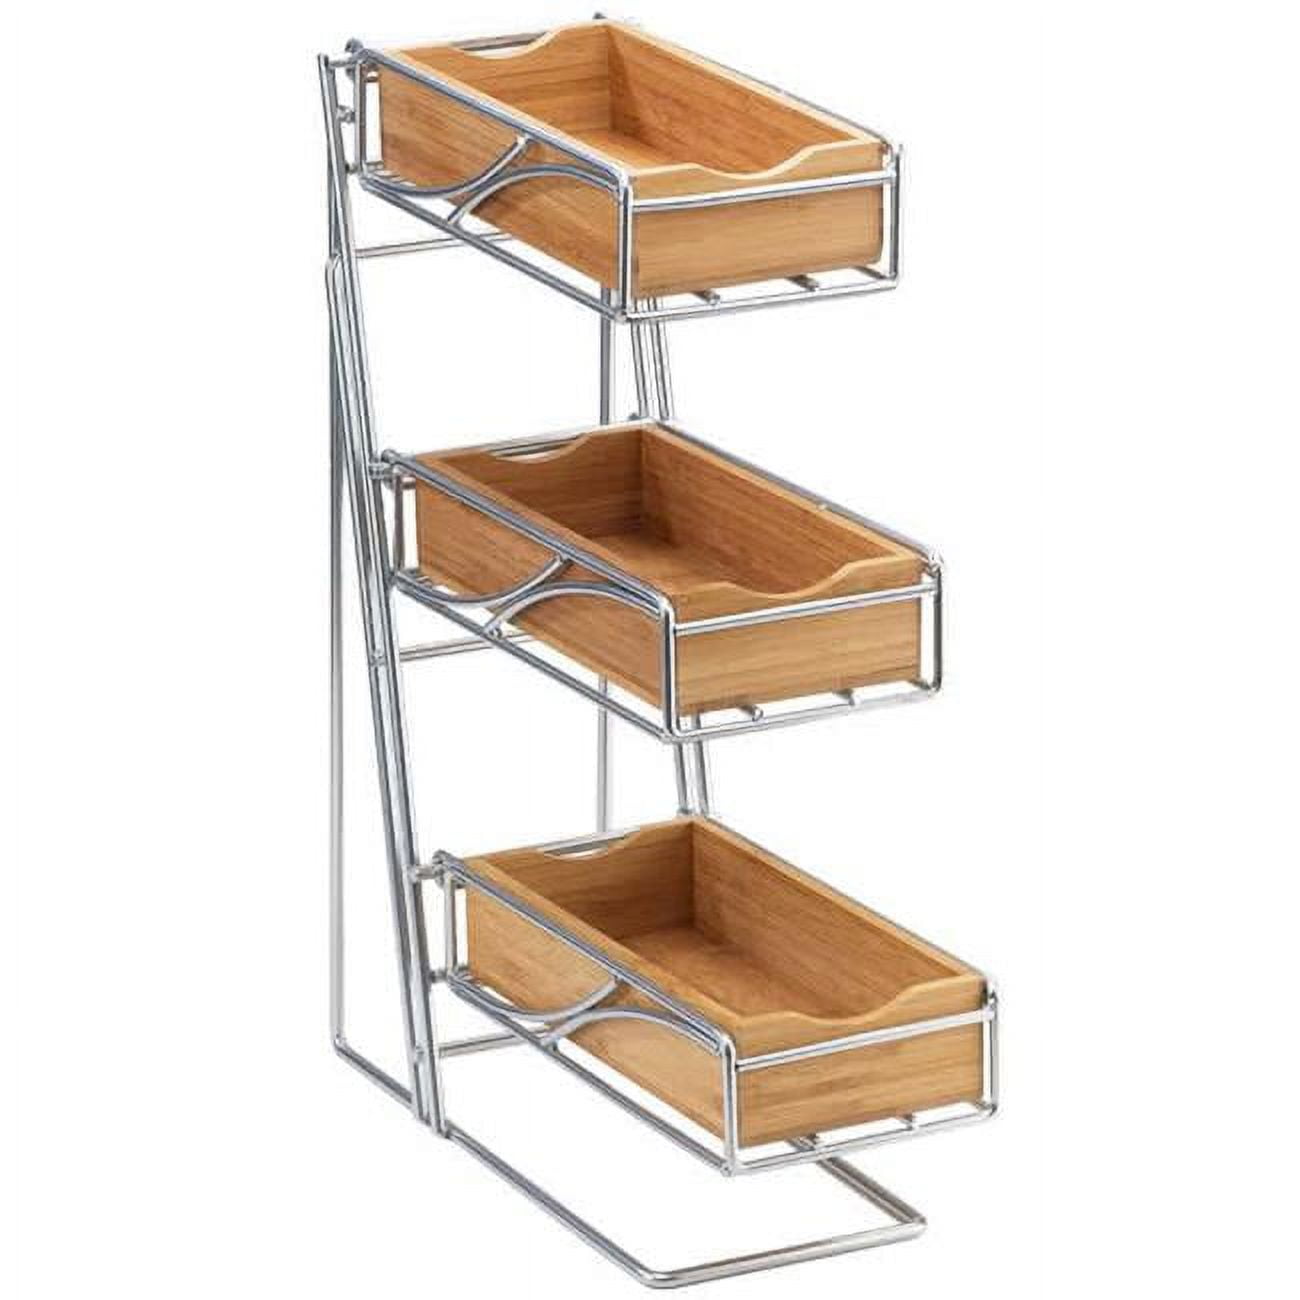 Picture of Cal Mil 1235-39-60 Platinum Three Tier Flatware Display with Bamboo Bins - 5.25 x 14 x 18 in.